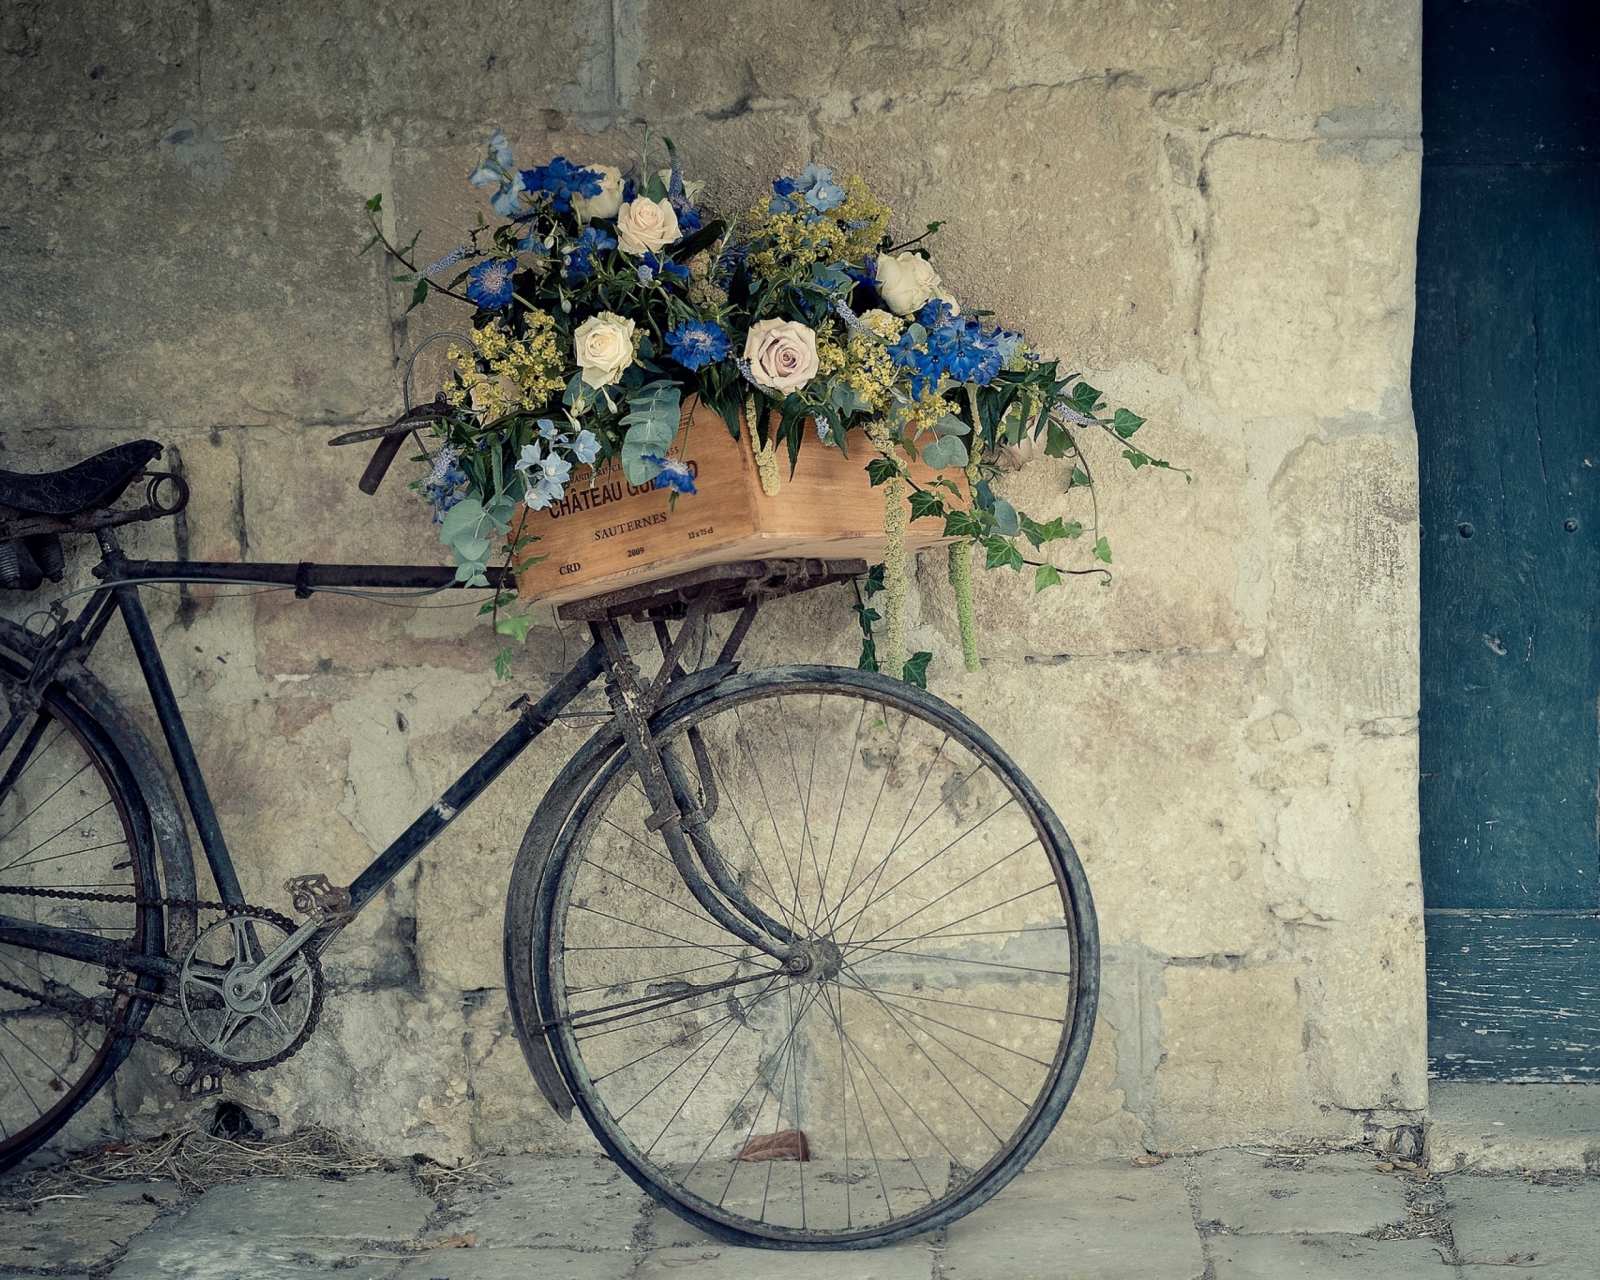 Sfondi Bicycle With Basket Full Of Flowers 1600x1280